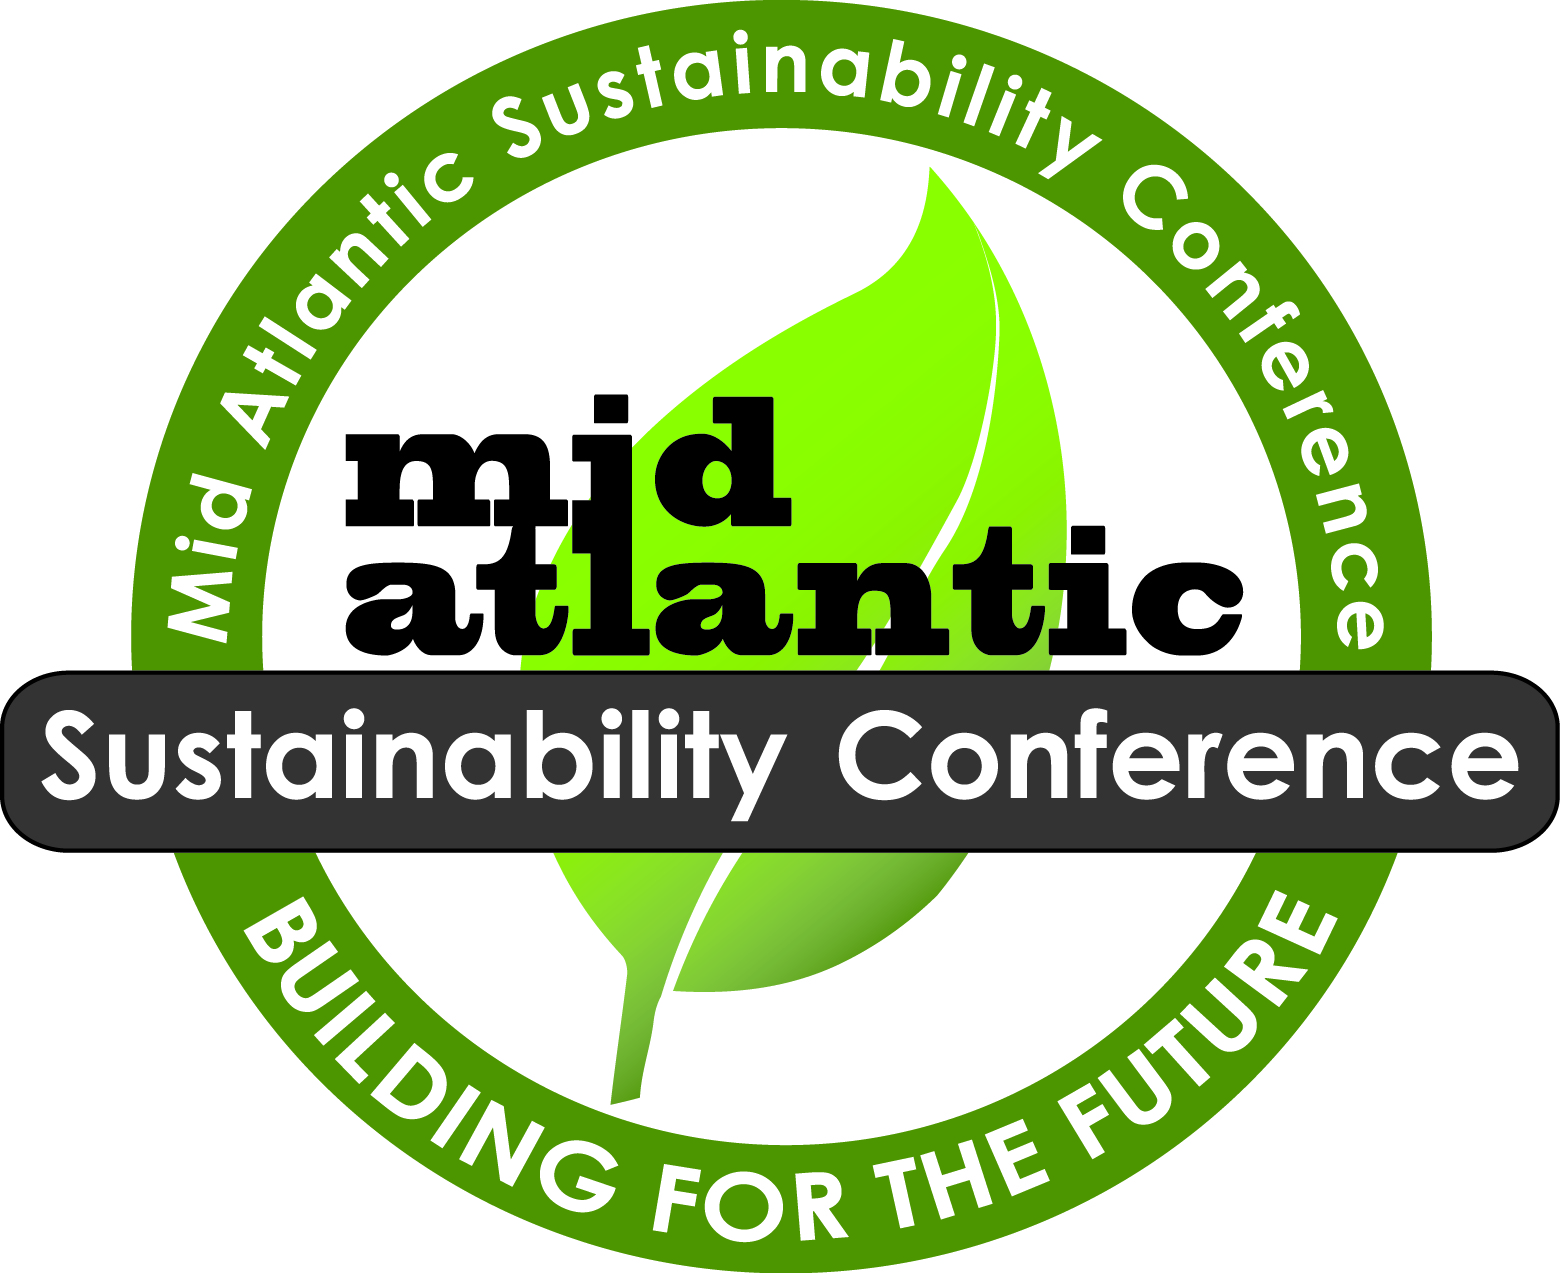 Middle_Atlantic_Sustainability_Conference_Logo(final)_CS6